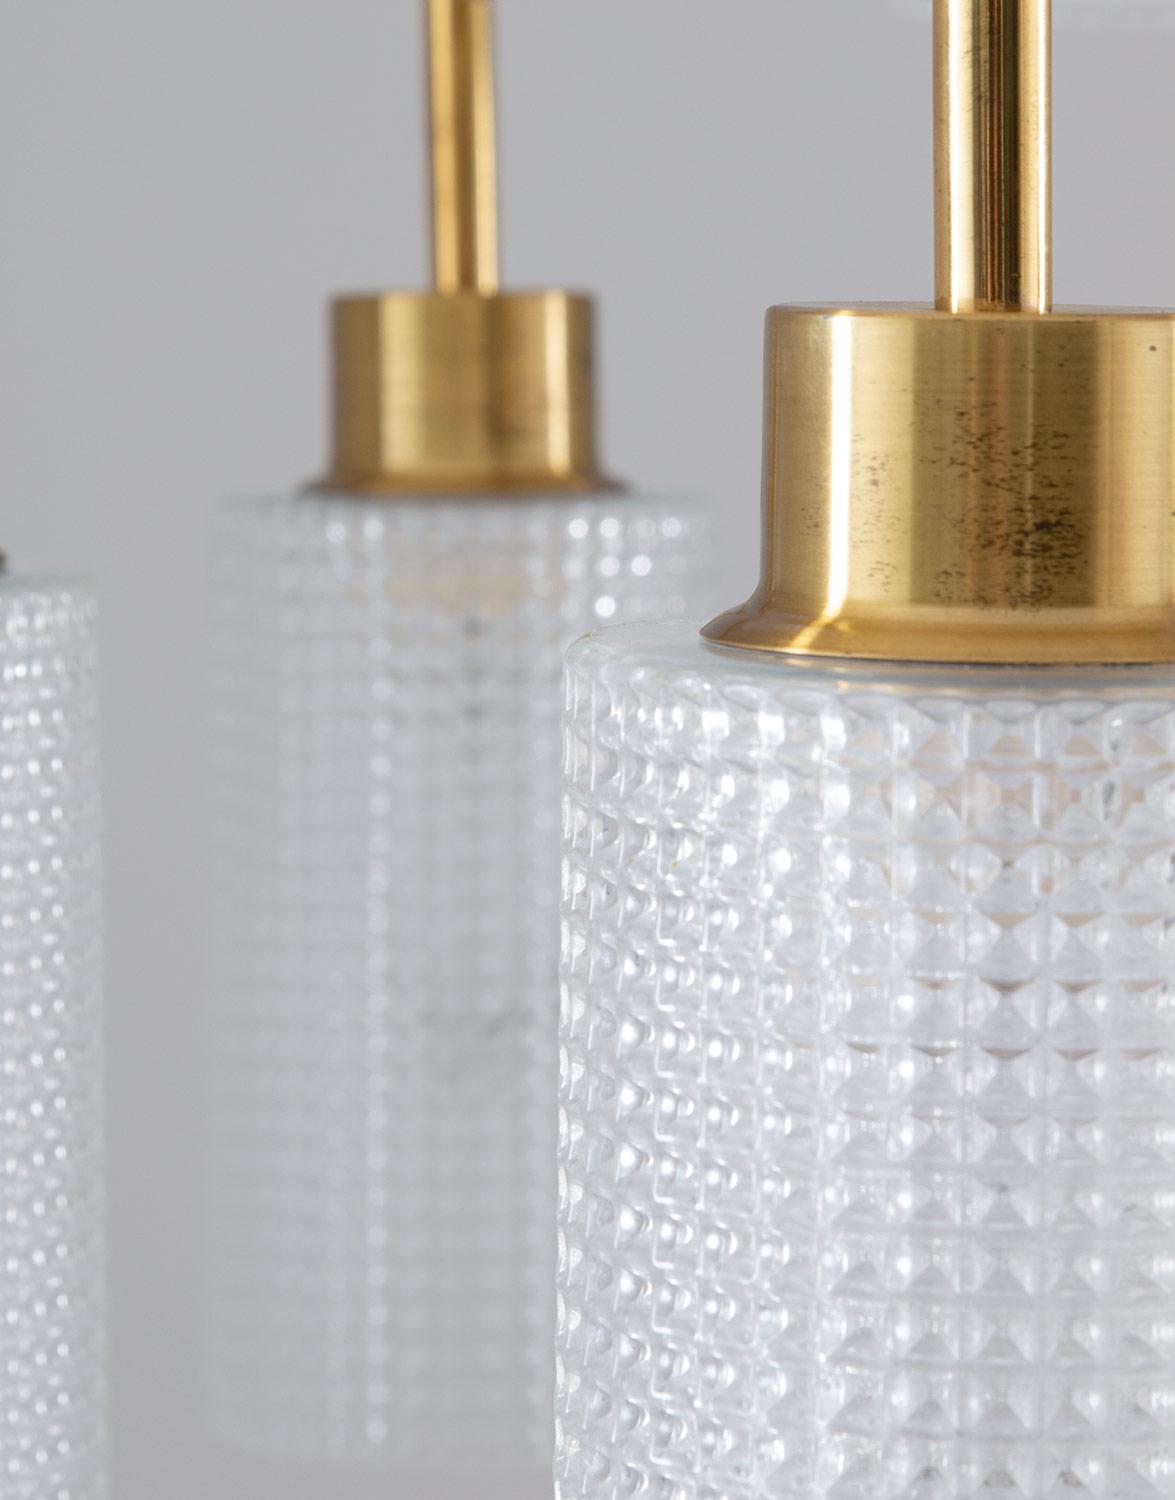 Swedish Chandeliers in Brass and Glass by Holger Johansson For Sale 2